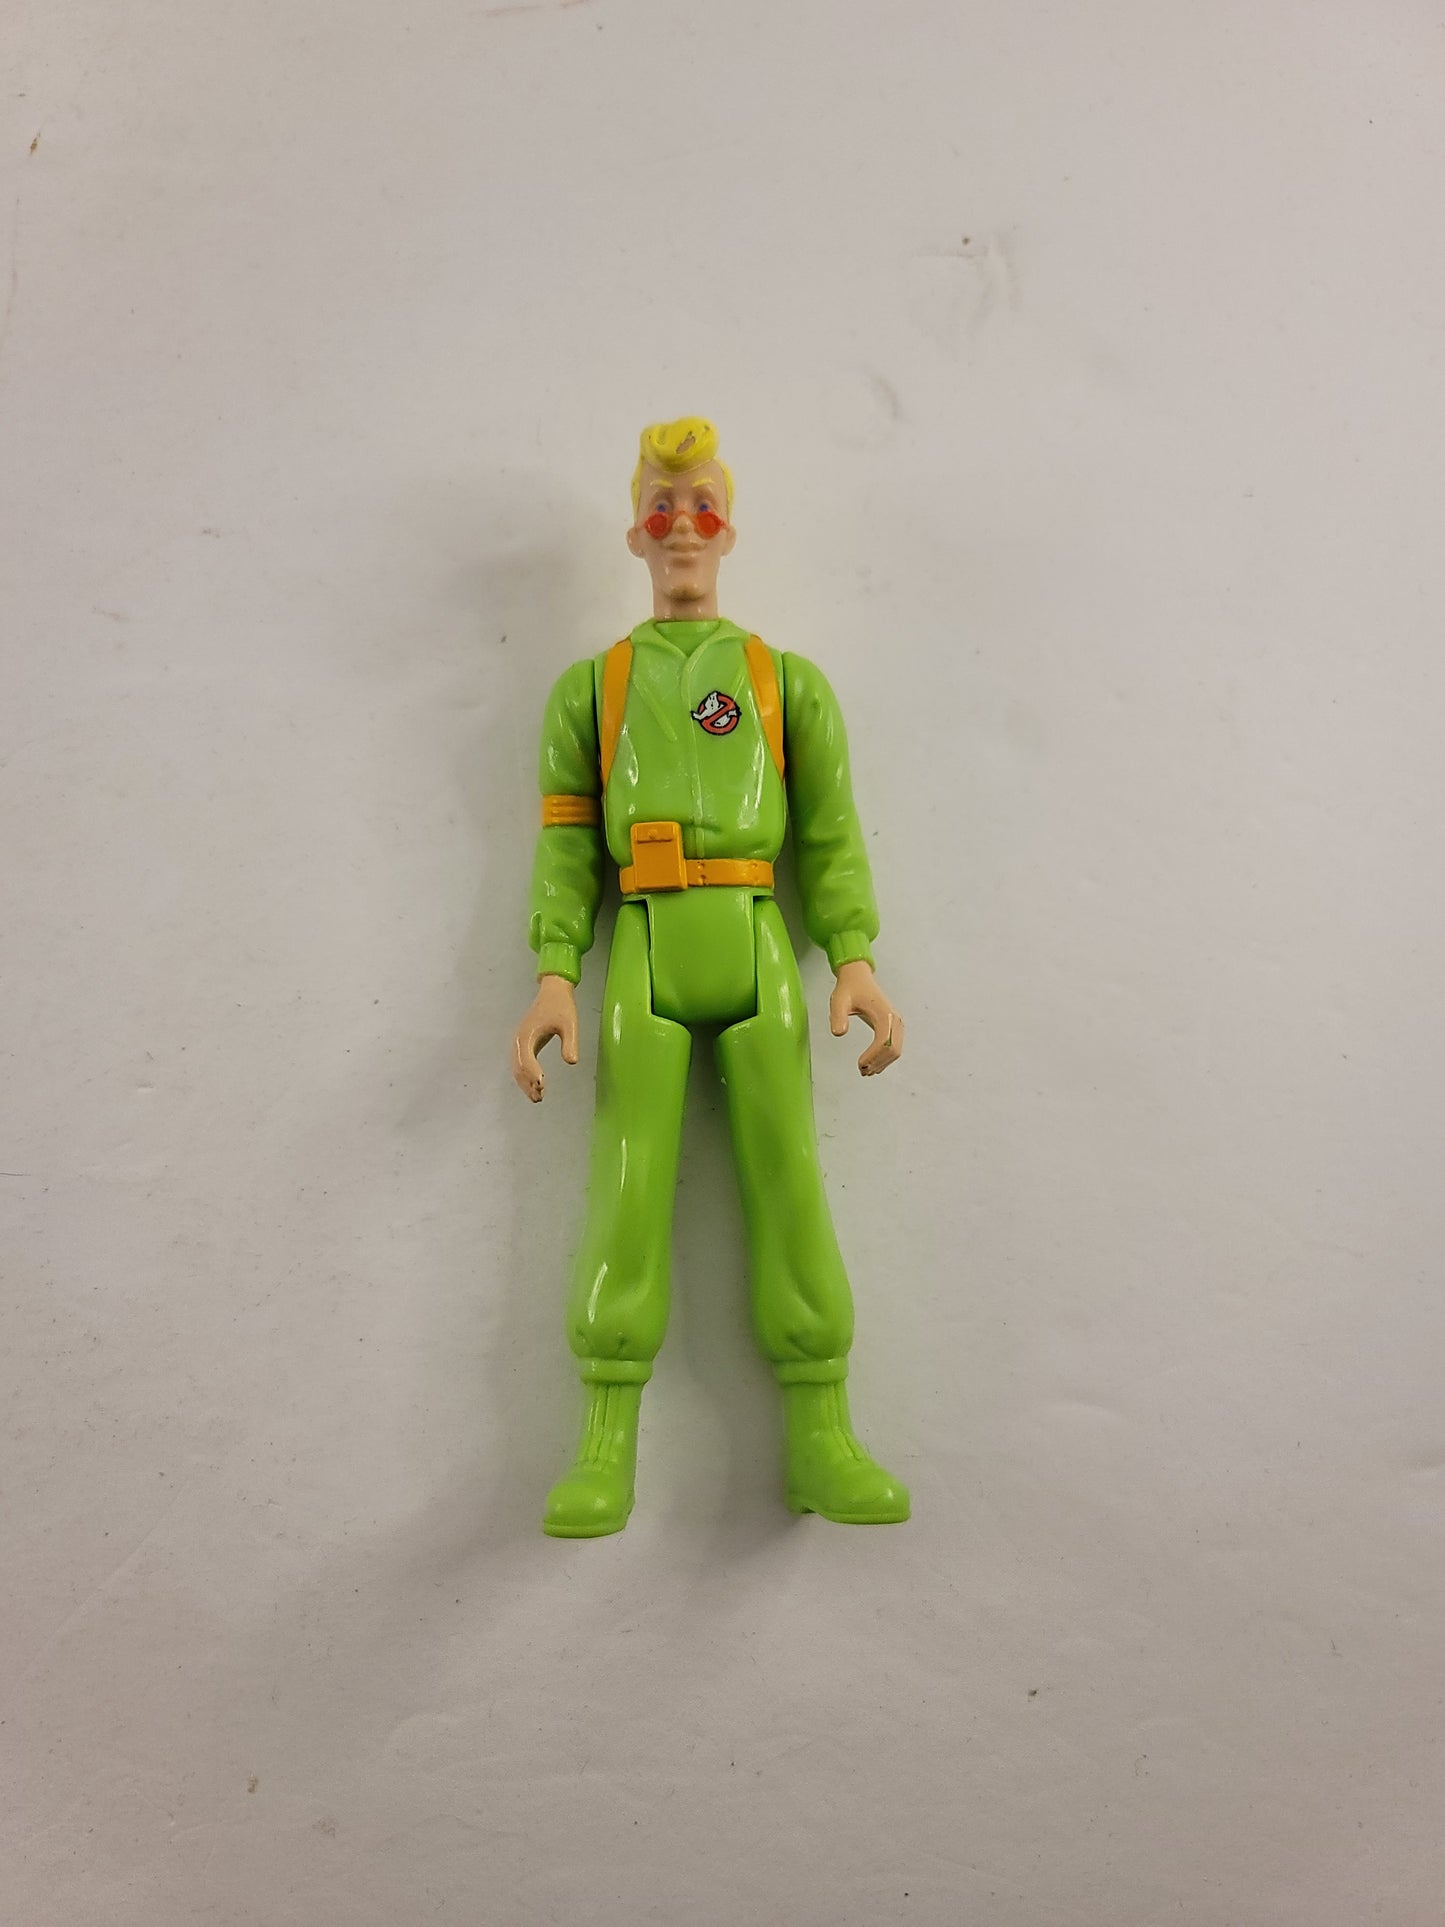 The Real Ghostbusters Vintage Lot Of 10 Action Figures